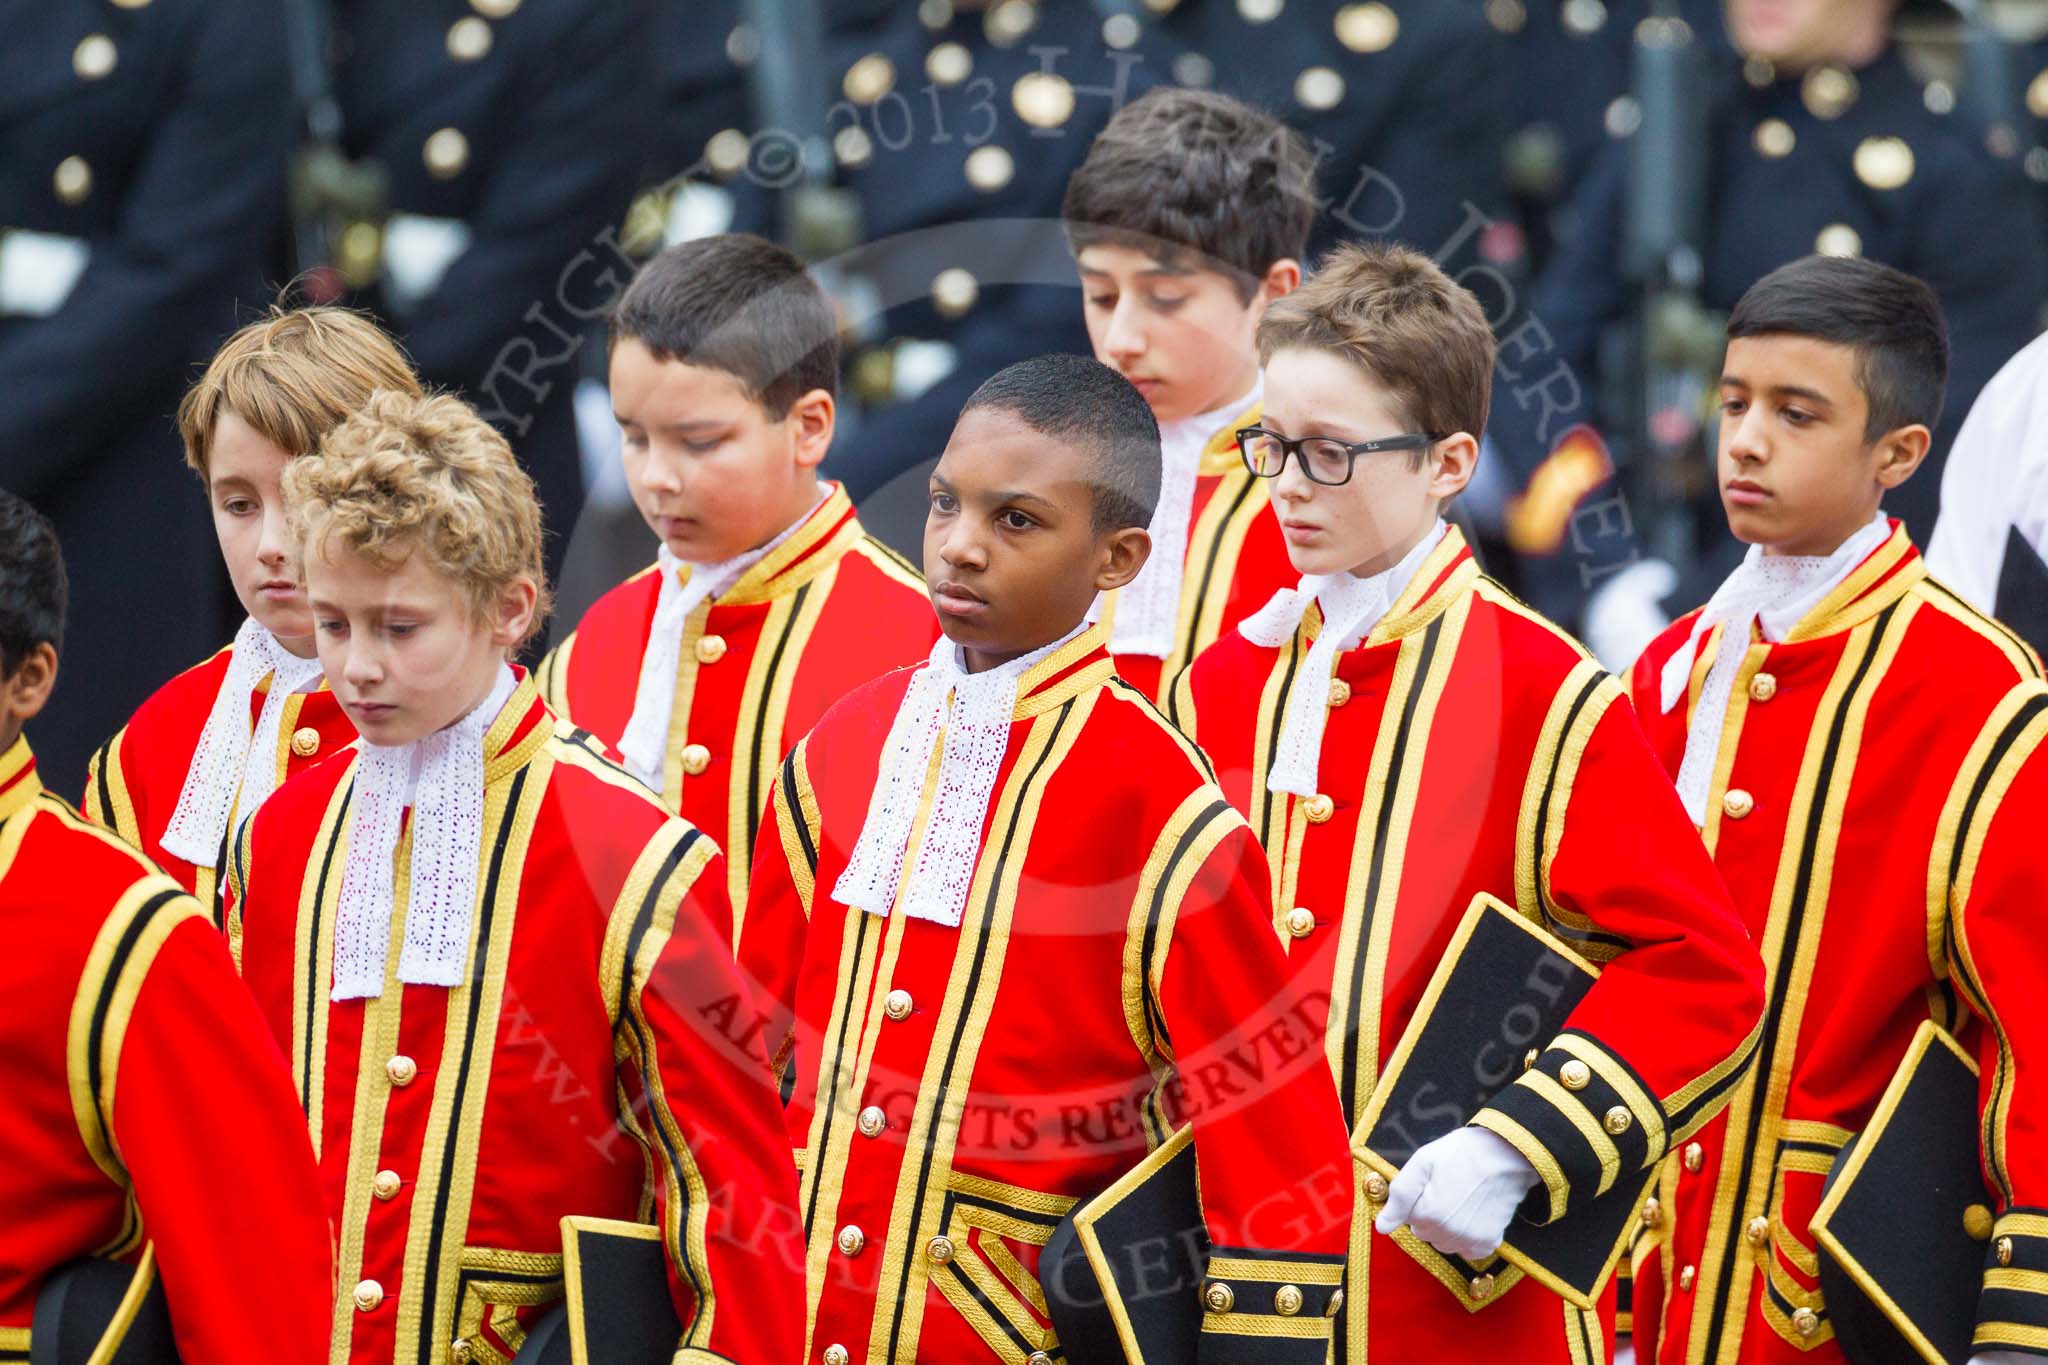 Remembrance Sunday at the Cenotaph 2015: The 10 Children of the Chapel Royal on their way from the Foreign- and Commonwealth Office building onto Whitehall. Image #80, 08 November 2015 10:54 Whitehall, London, UK